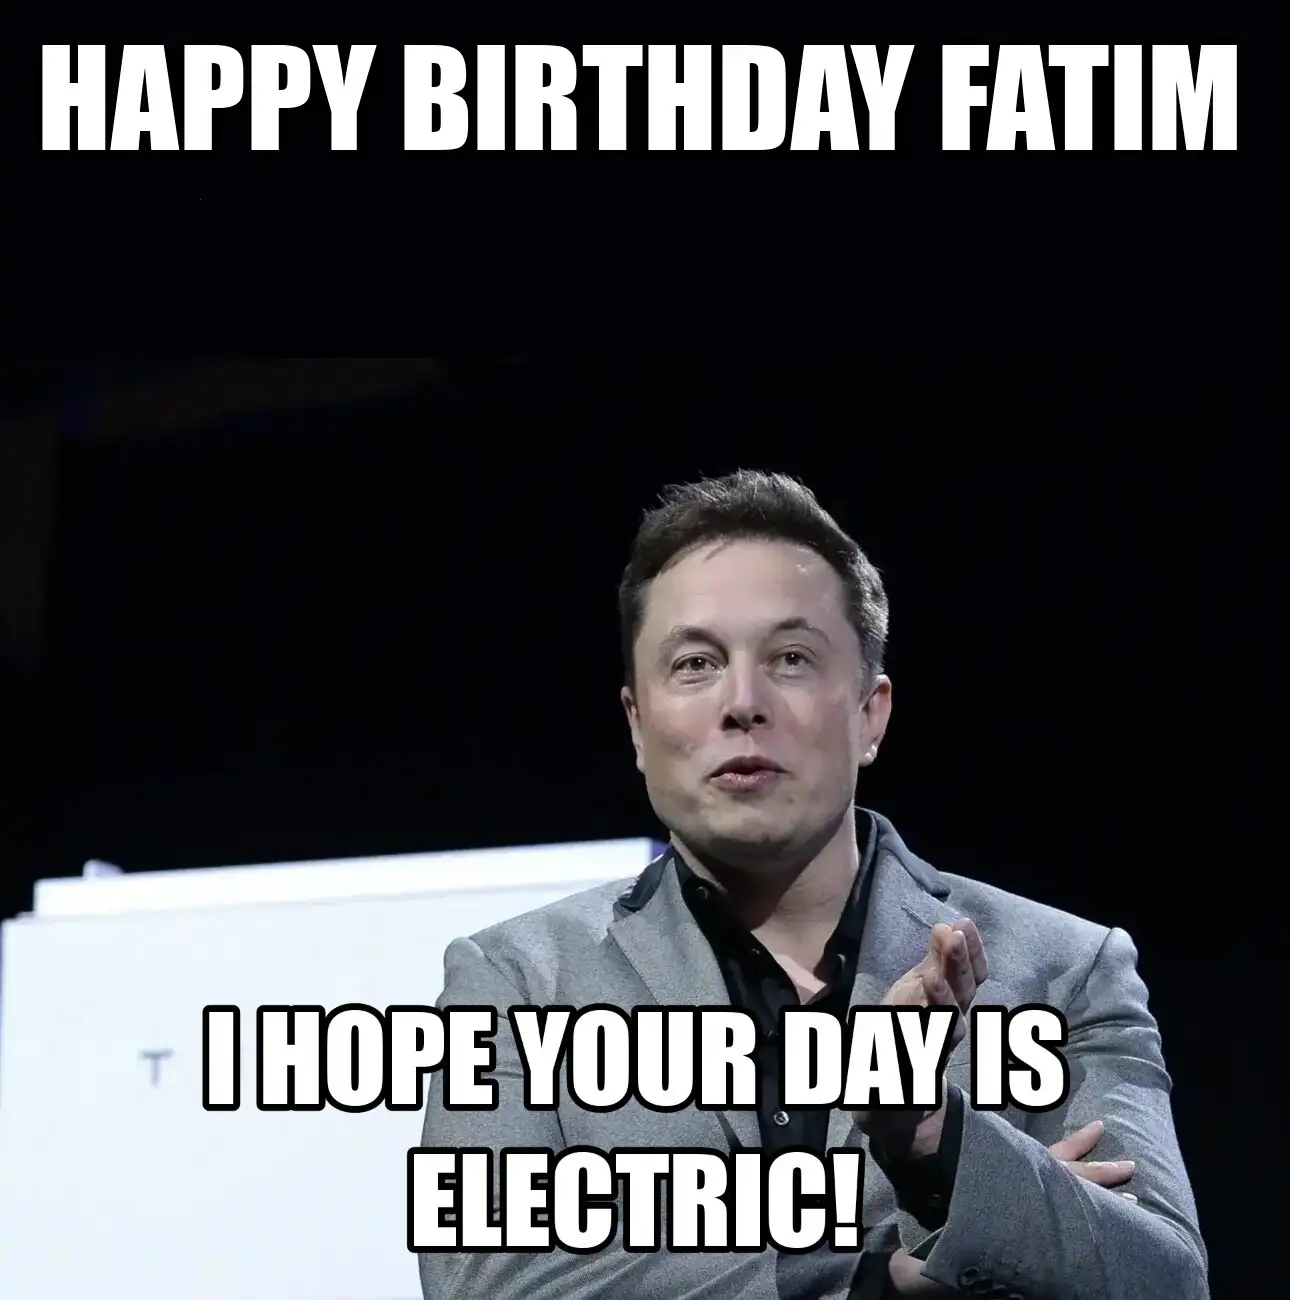 Happy Birthday Fatim I Hope Your Day Is Electric Meme